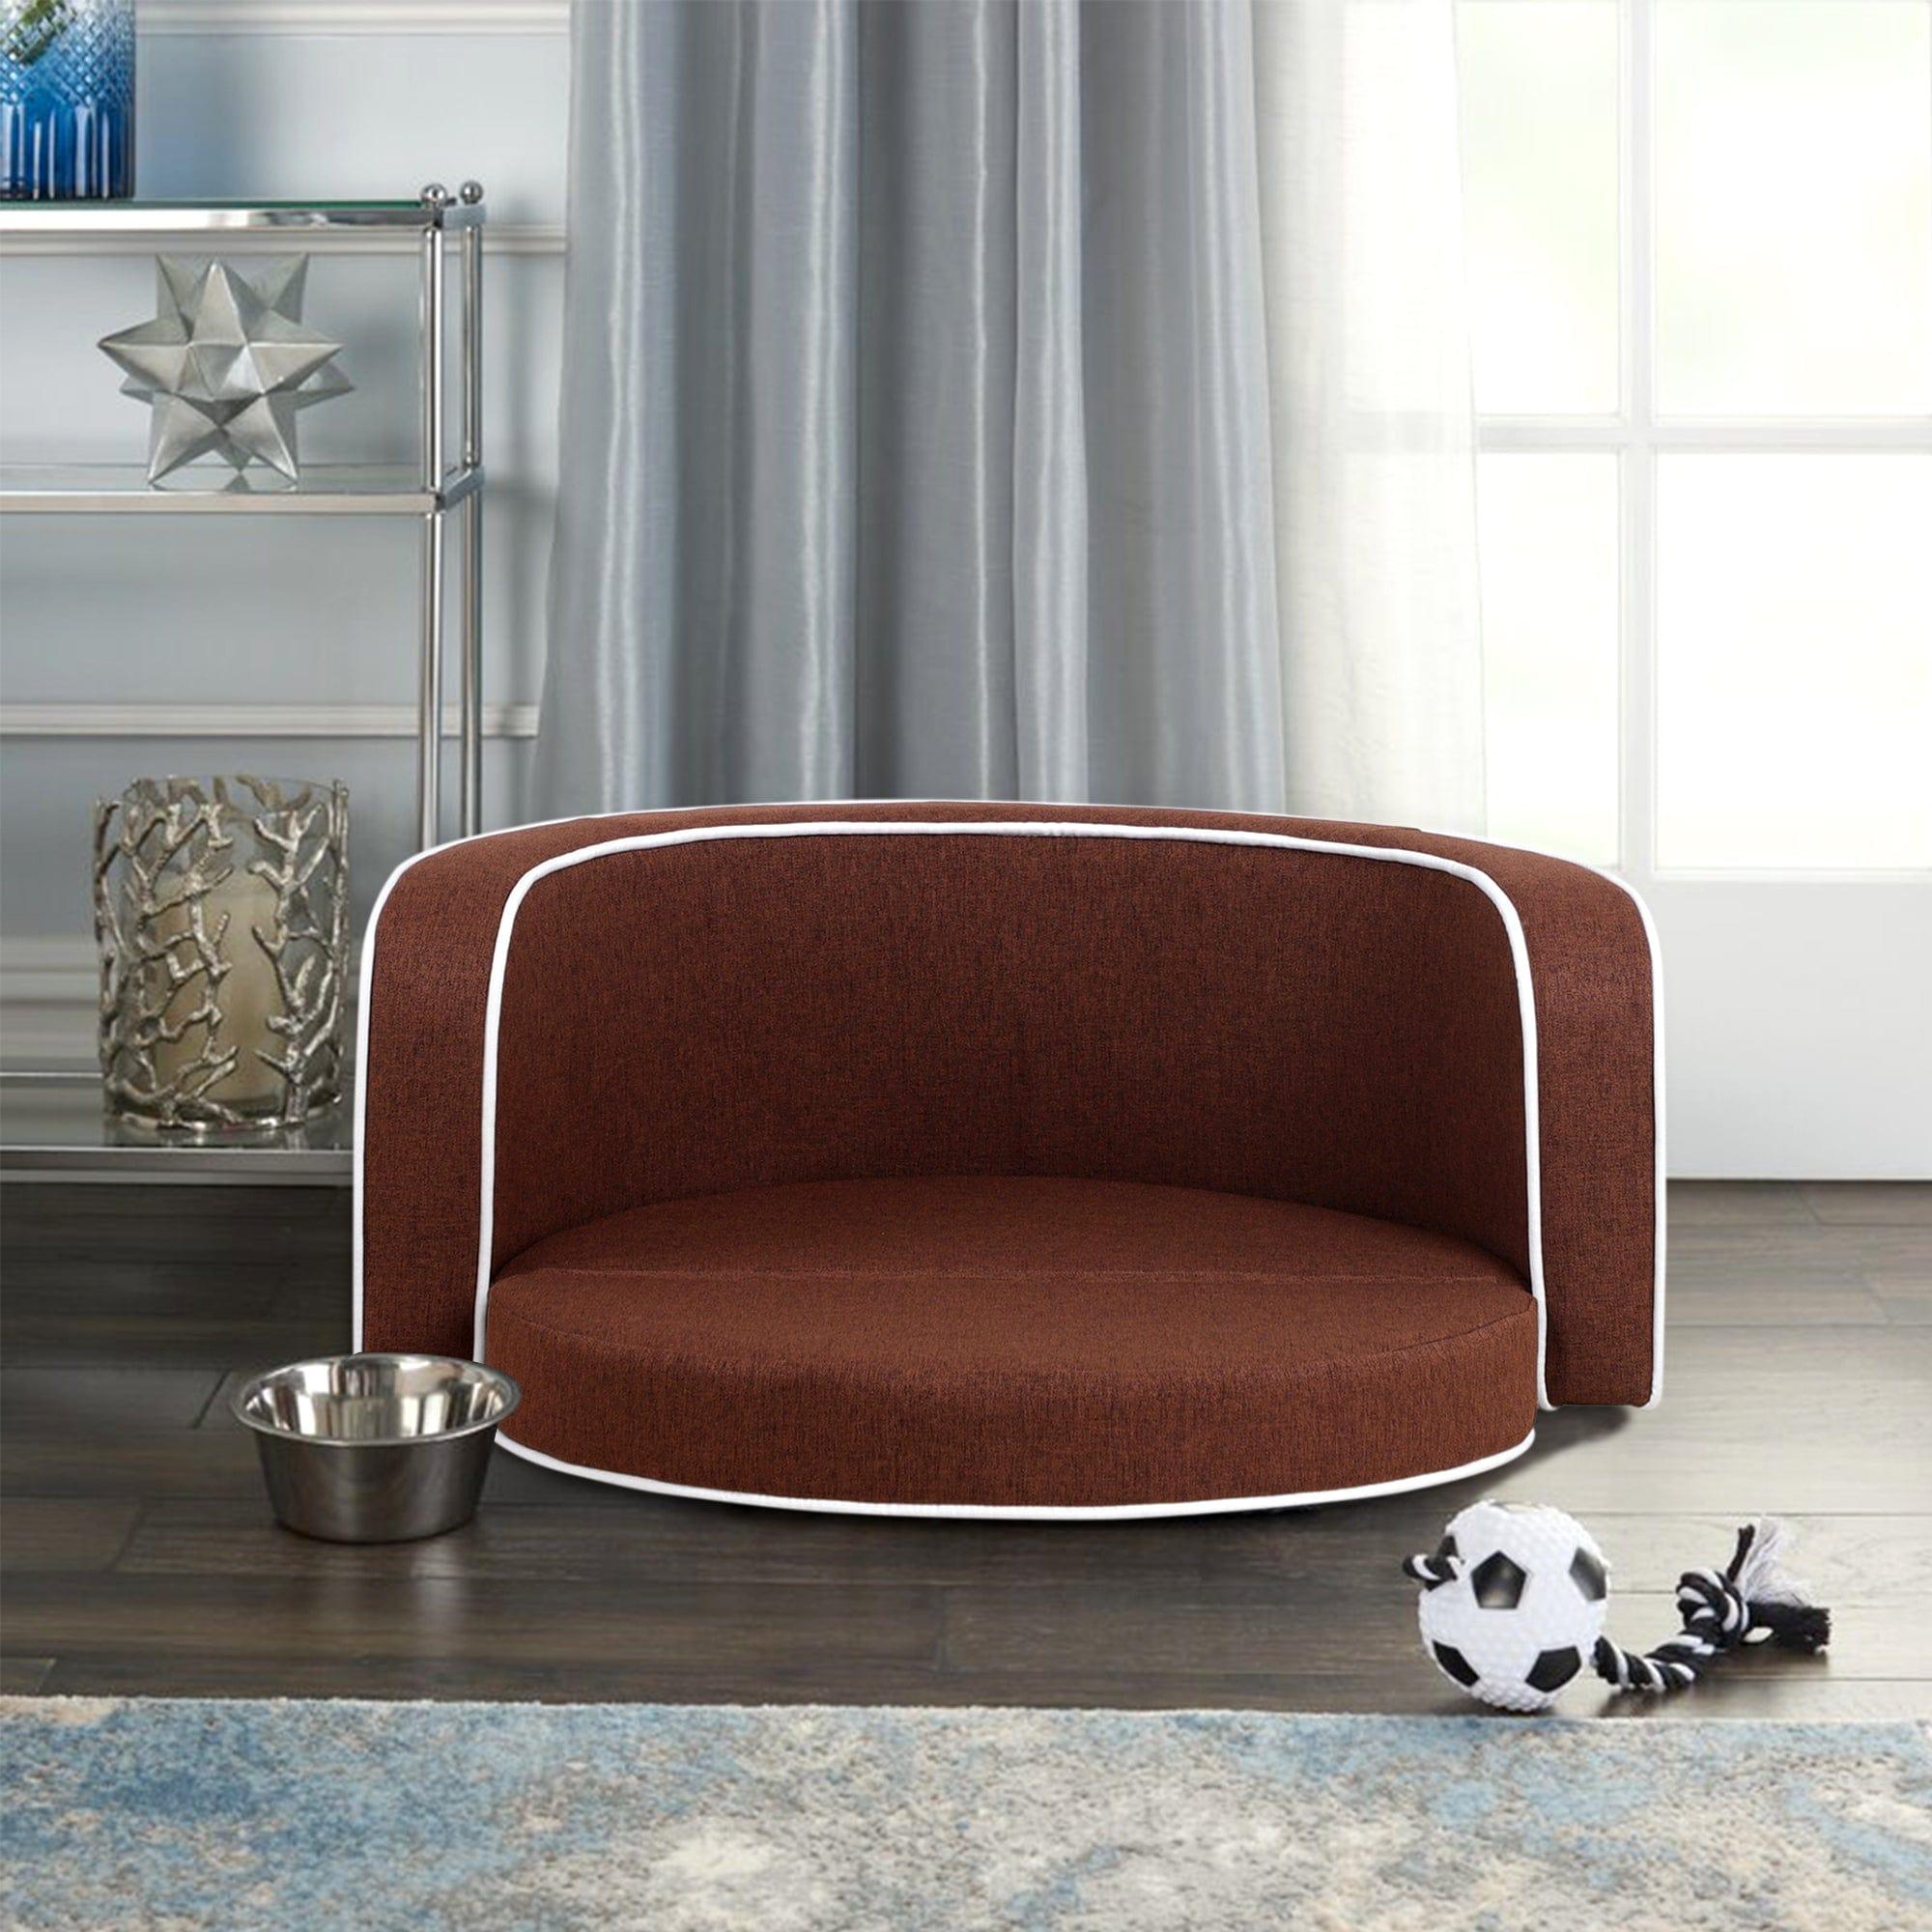 Shop 30" Brown Round Pet Sofa, Dog sofa, Dog bed, Cat Bed, Cat Sofa, with Wooden Structure and Linen Goods White Roller Lines on the Edges Curved Appearance pet Sofa with Cushion Mademoiselle Home Decor